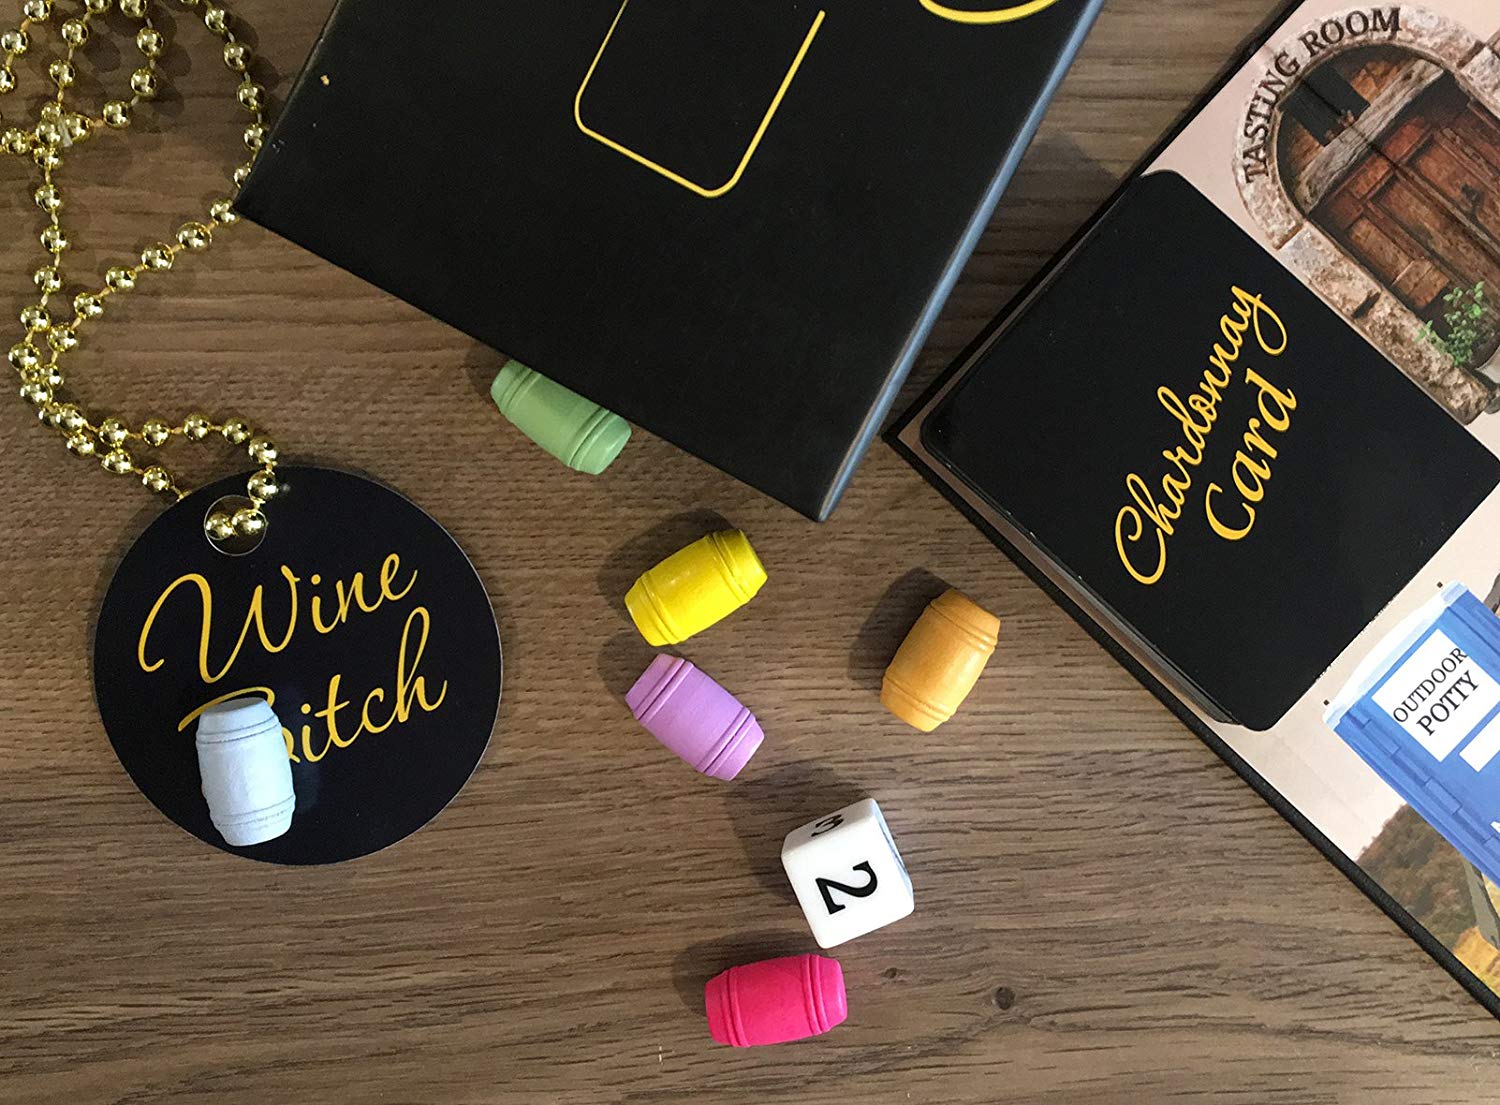 Chardonnay Go Is The Ultimate Party Game For Wine Lovers